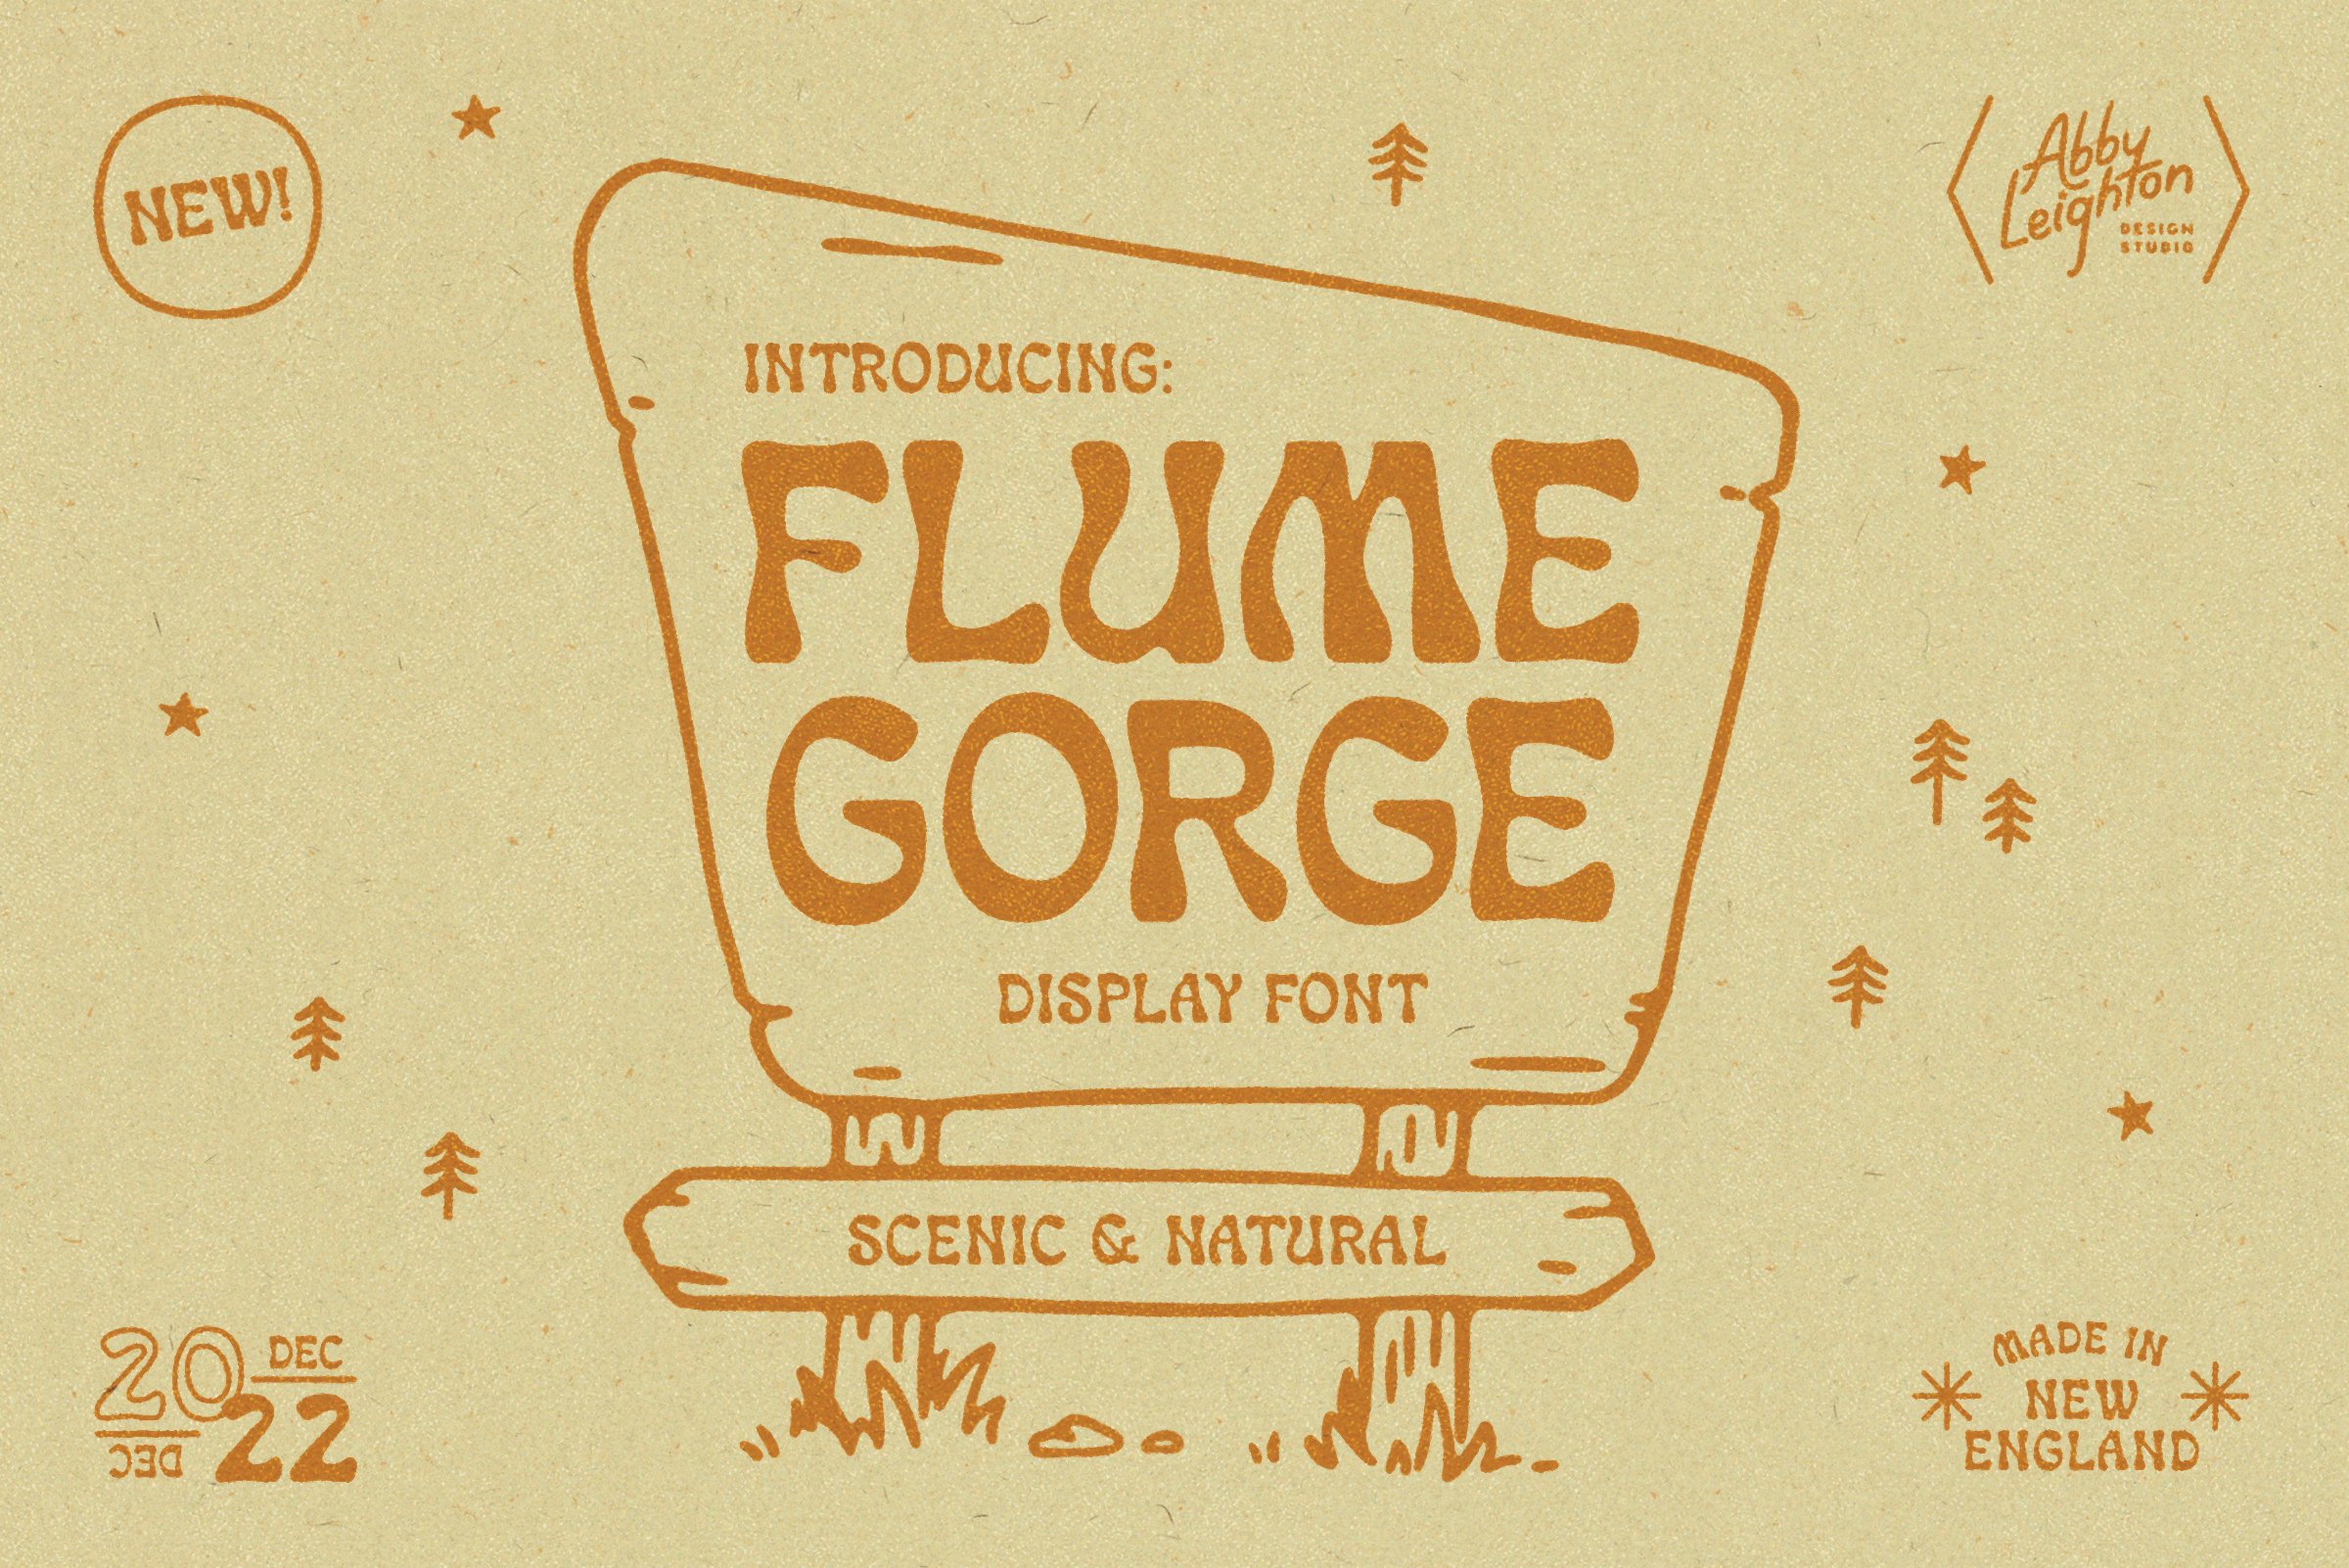 FLUME GORGE by Abby Leighton cover image.